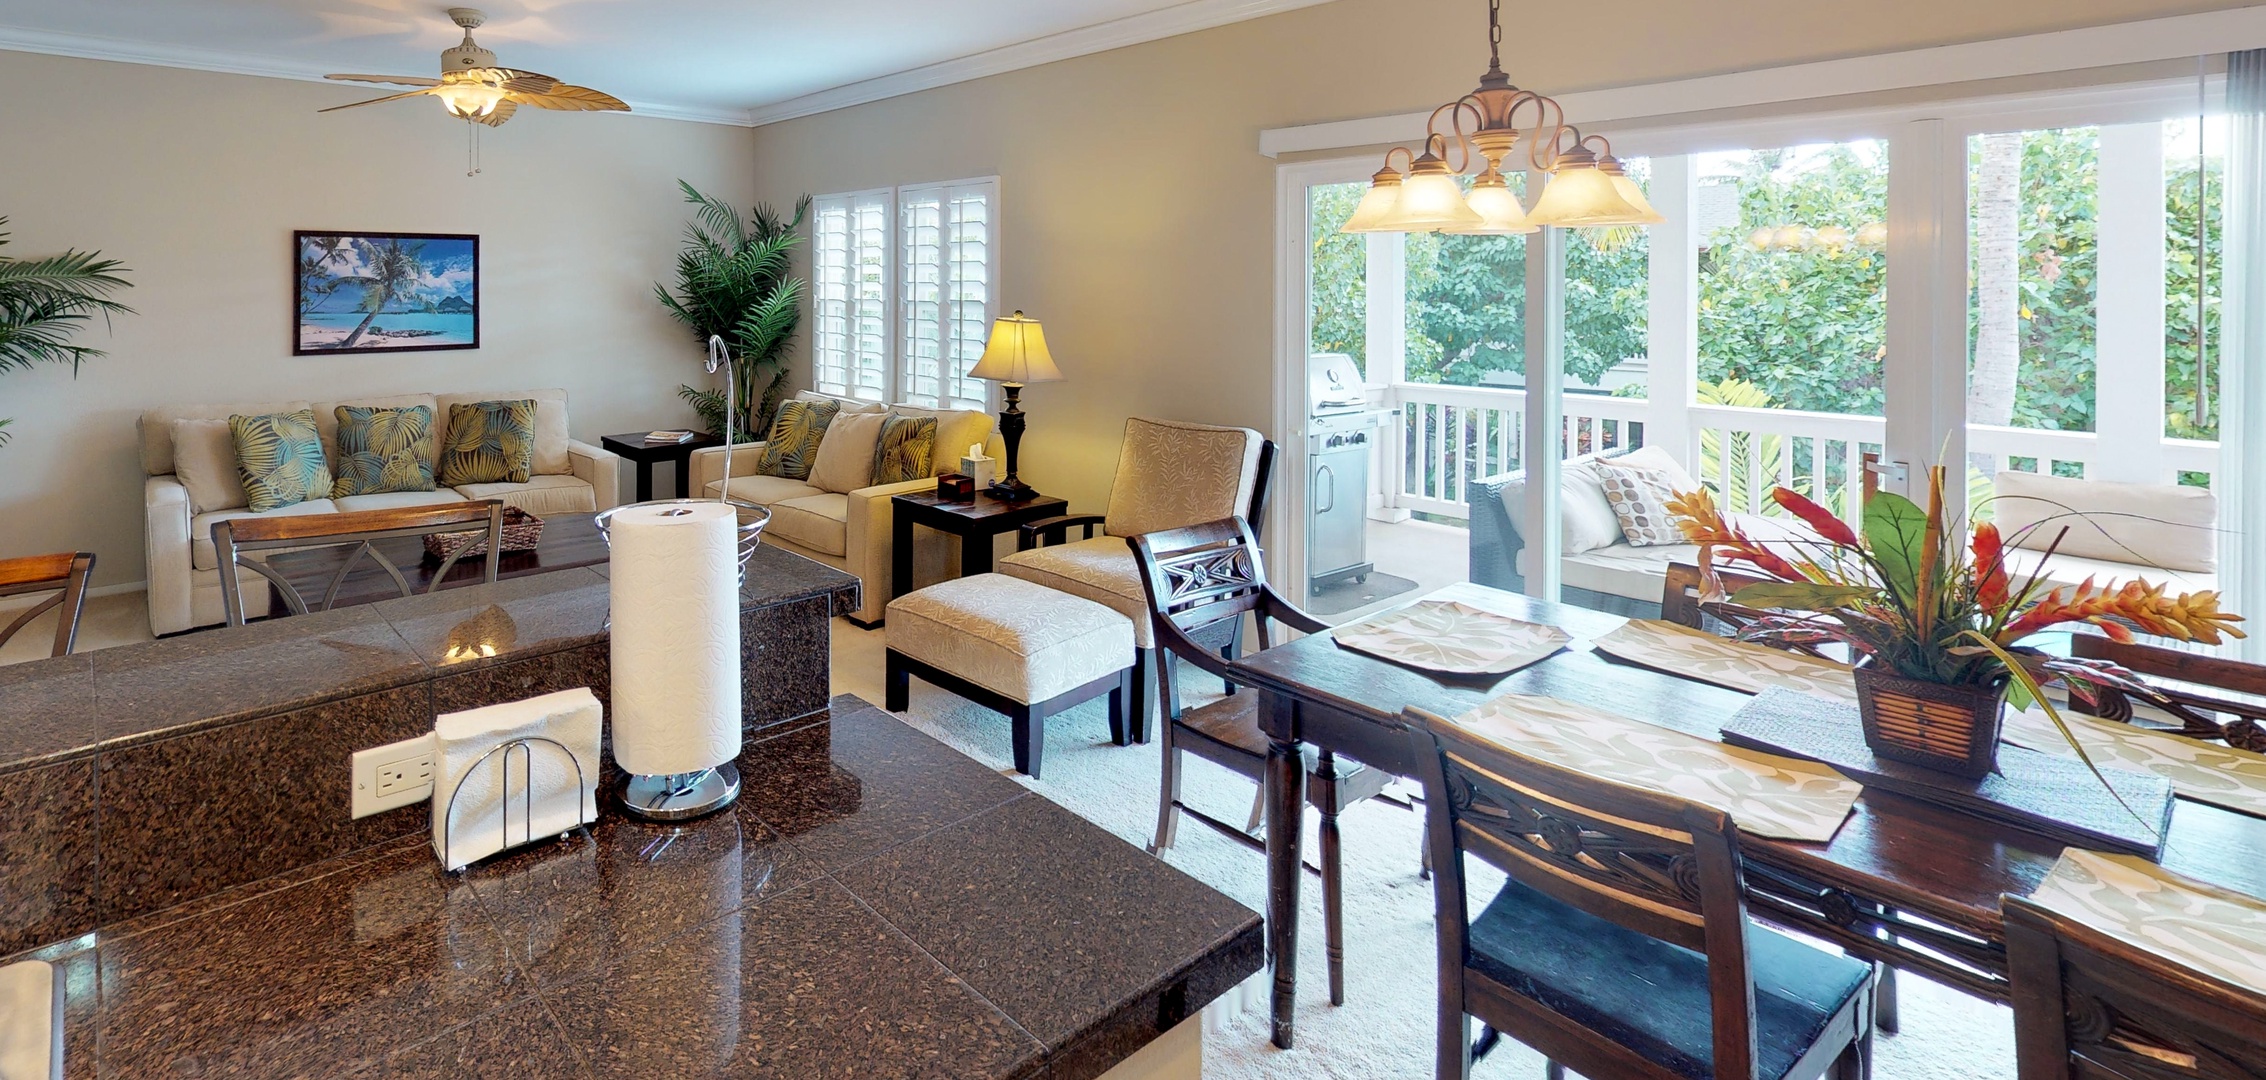 Kapolei Vacation Rentals, Coconut Plantation 1194-3 - Let the island breezes in through this seamless living space.